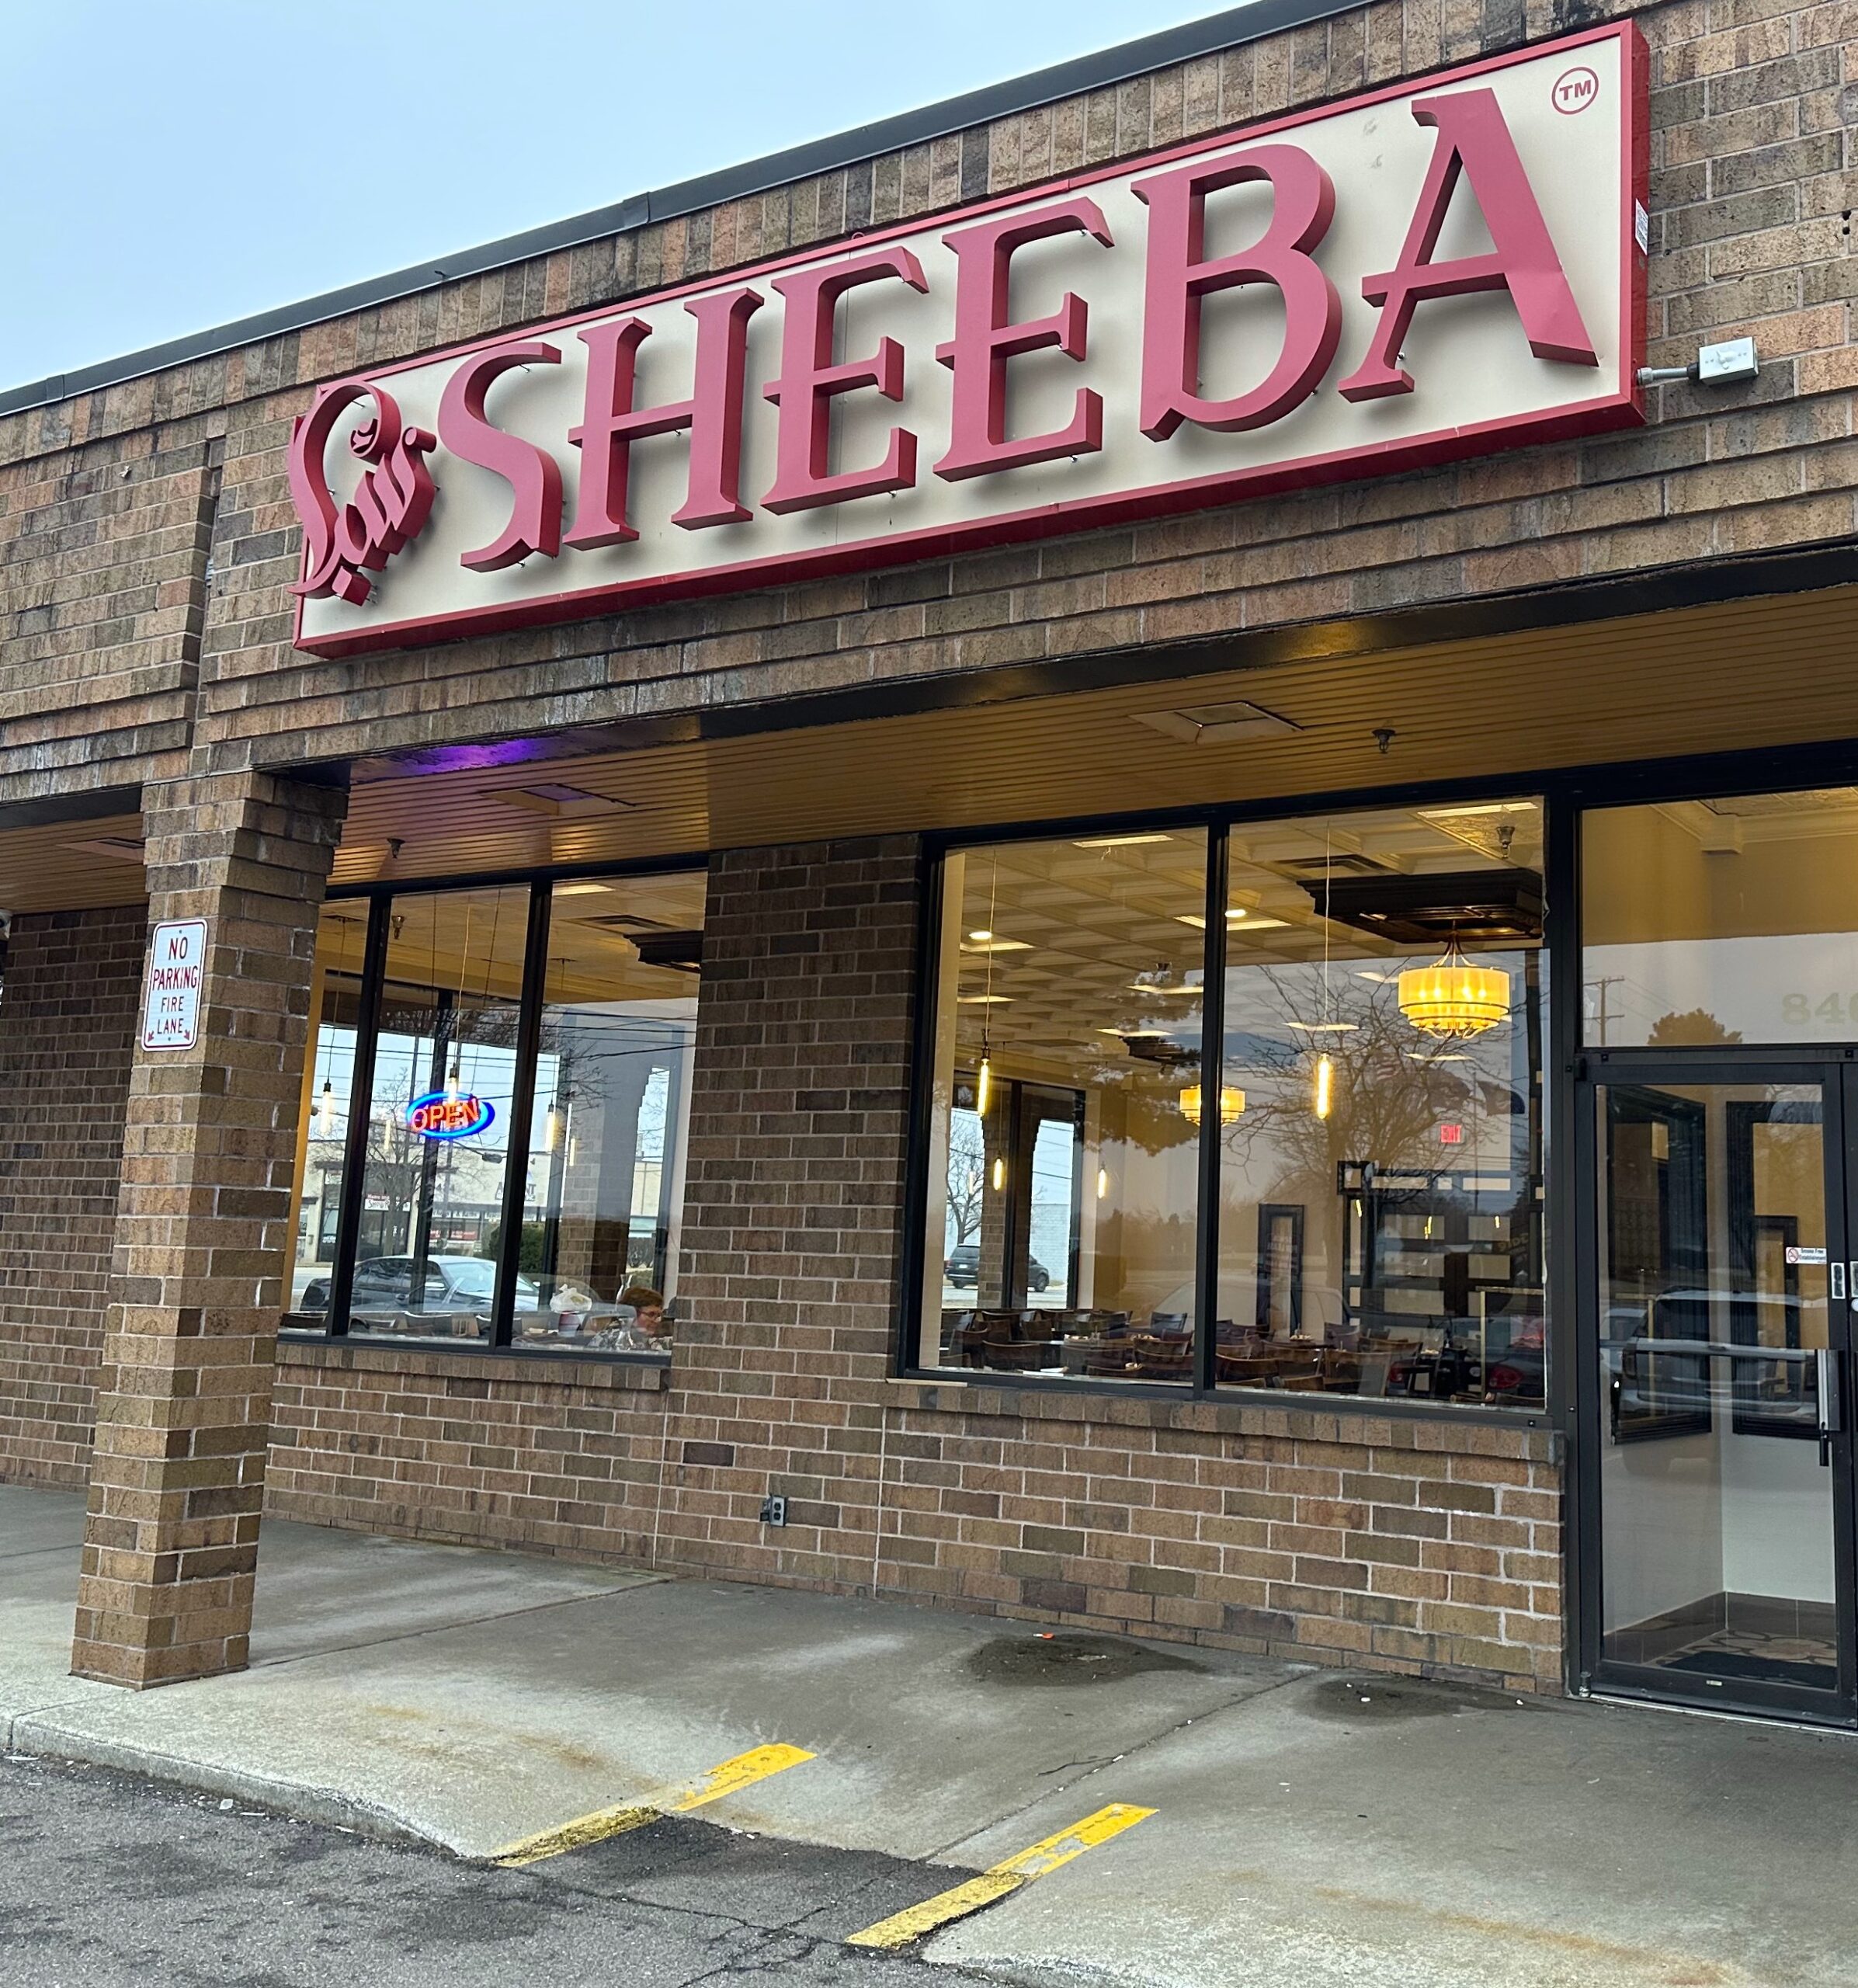 Sheeba is located at 8465 N. Lilley Road.